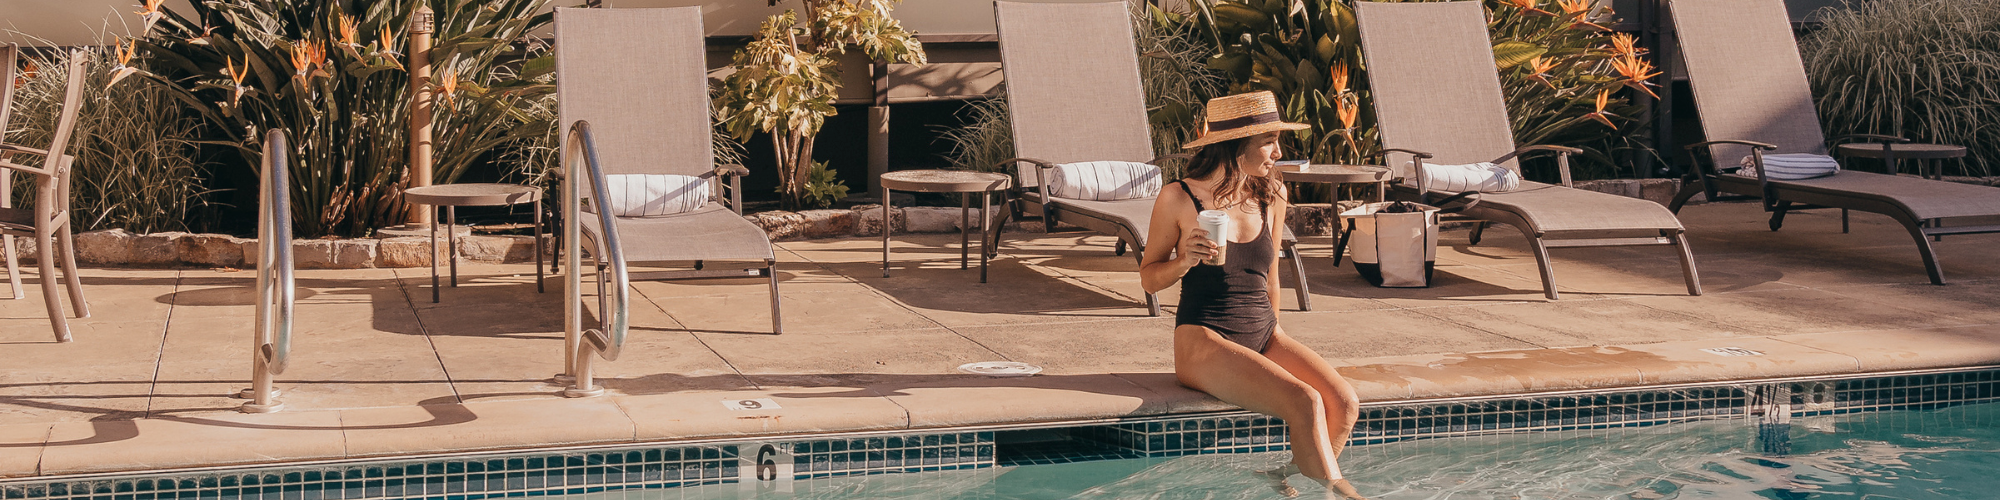 A woman in a black swimsuit and straw hat sits at the edge of a pool, with lounge chairs and plants in the background.